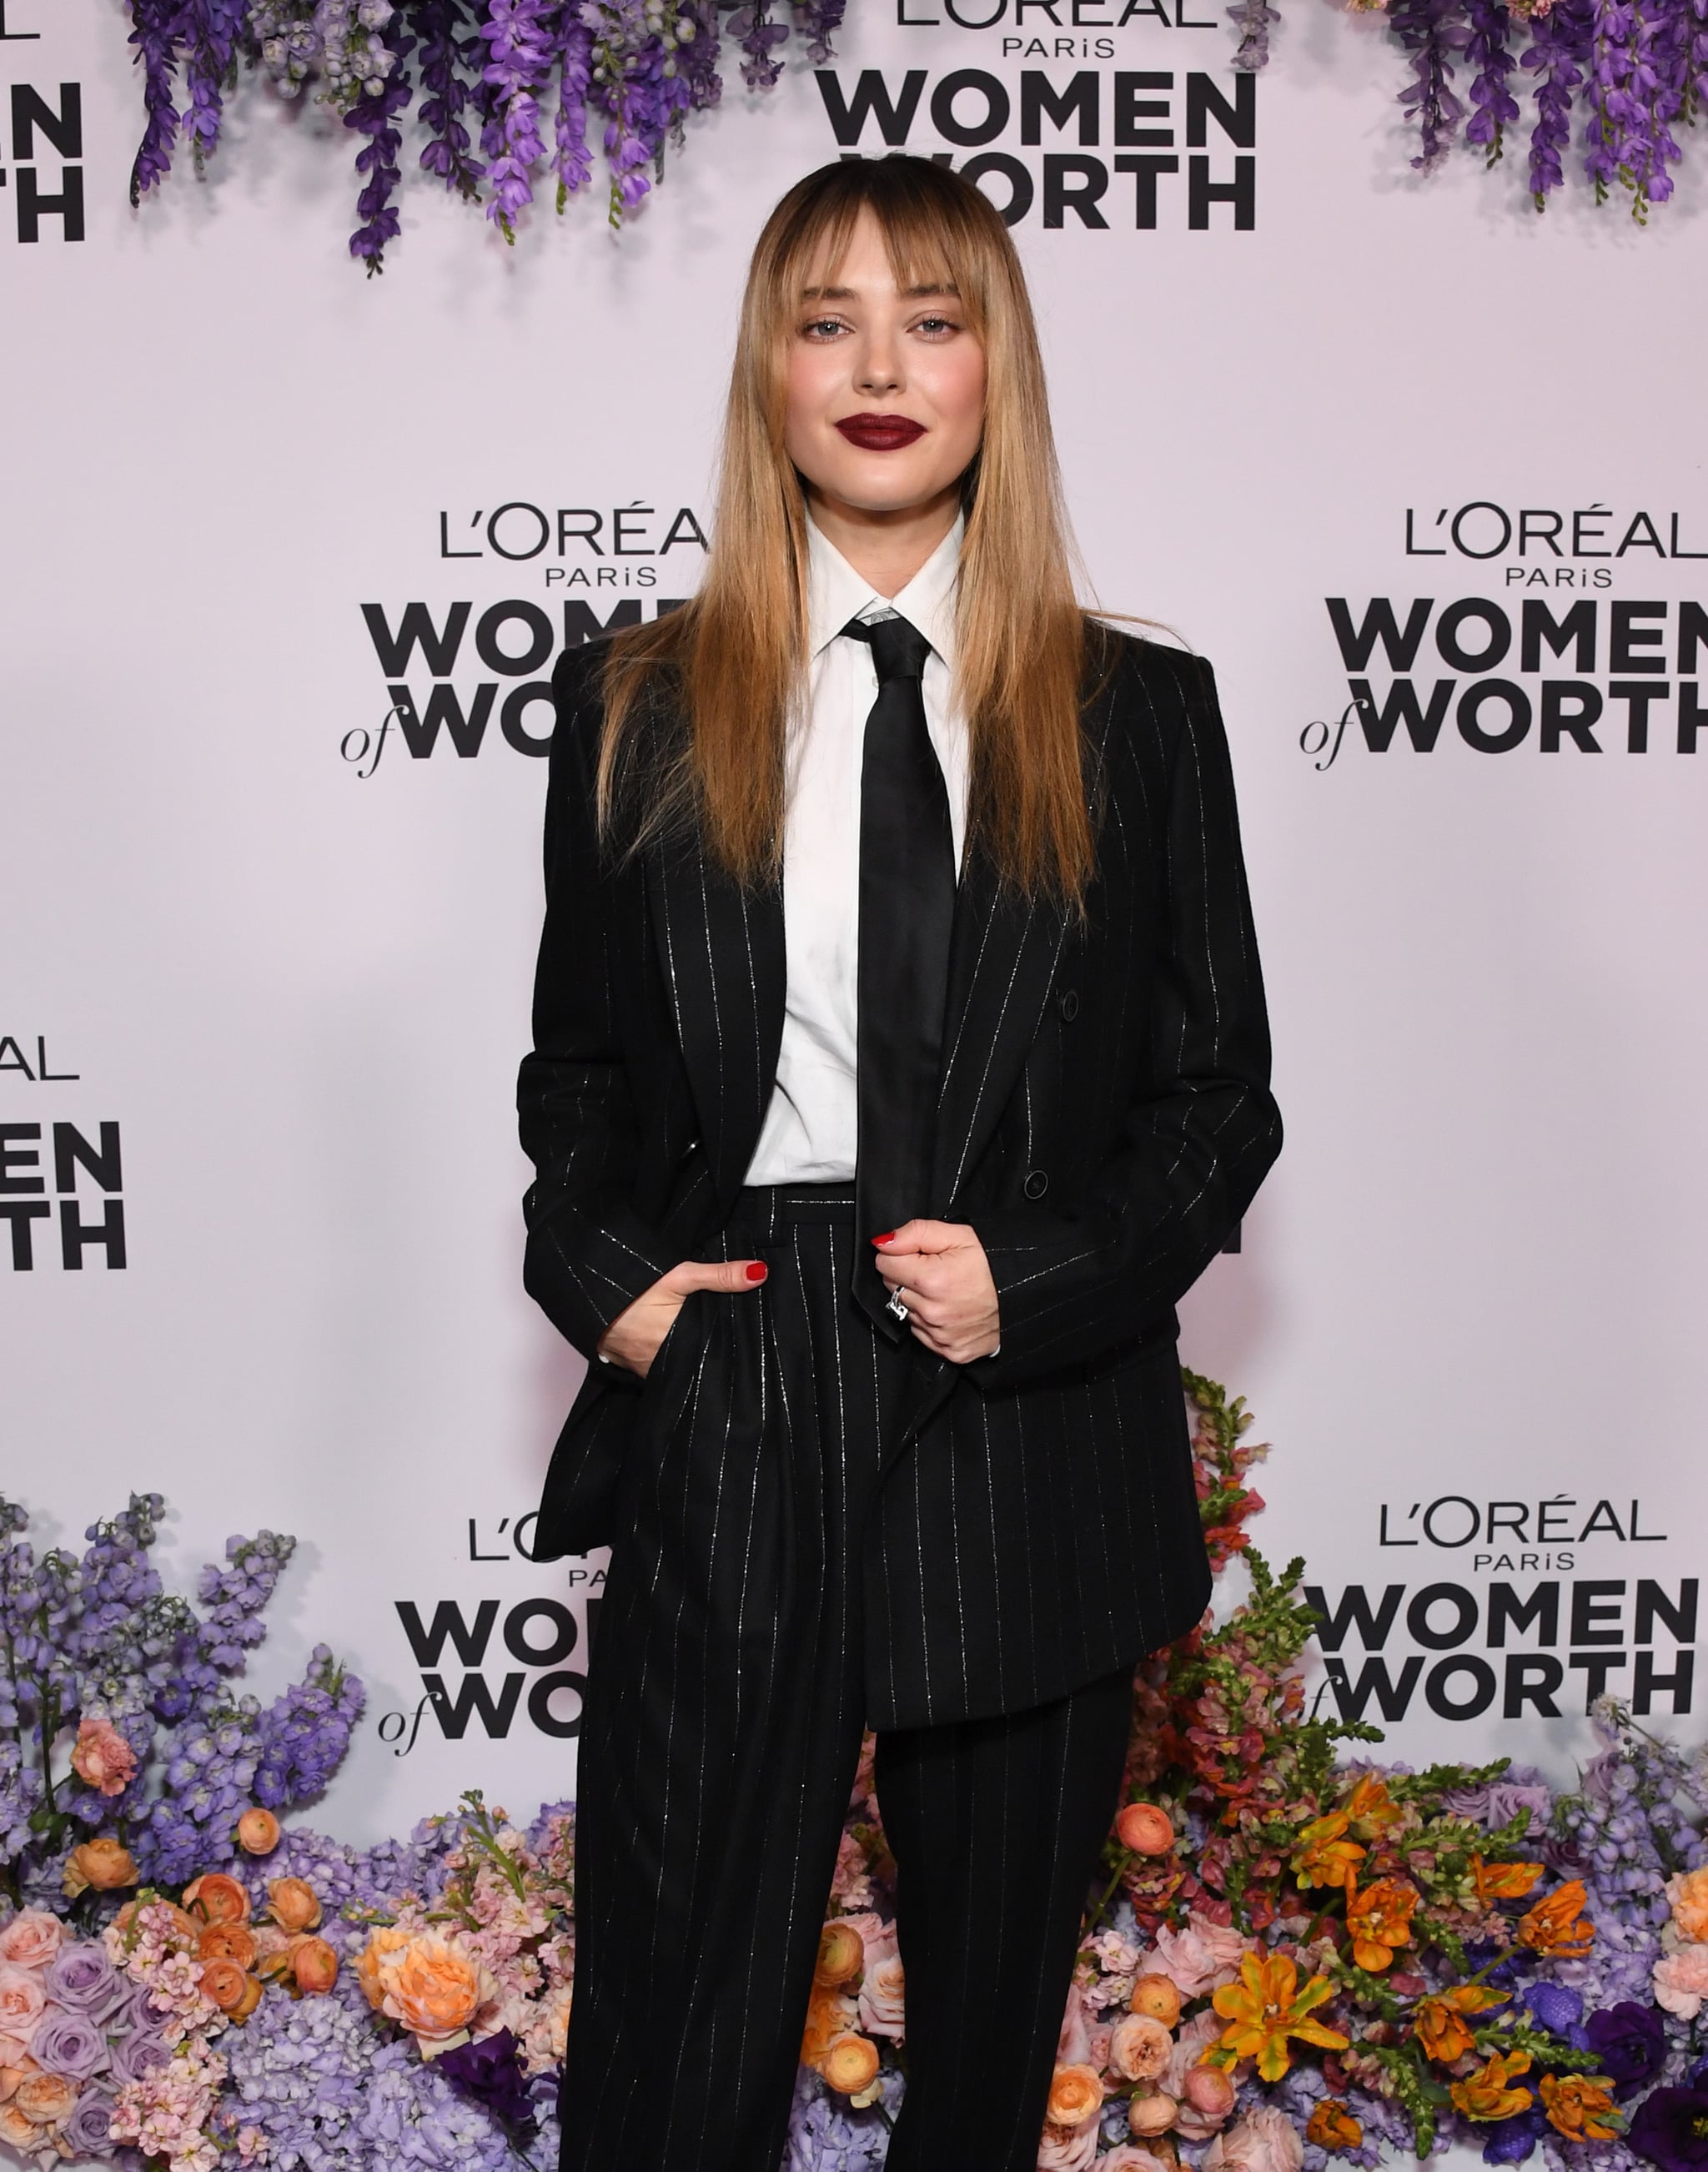 LOS ANGELES, CALIFORNIA - DECEMBER 01: Katherine Langford attends L'Oréal Paris' Women Of Worth Celebration at The Ebell Club of Los Angeles on December 01, 2022 in Los Angeles, California. (Photo by Jon Kopaloff/Getty Images)